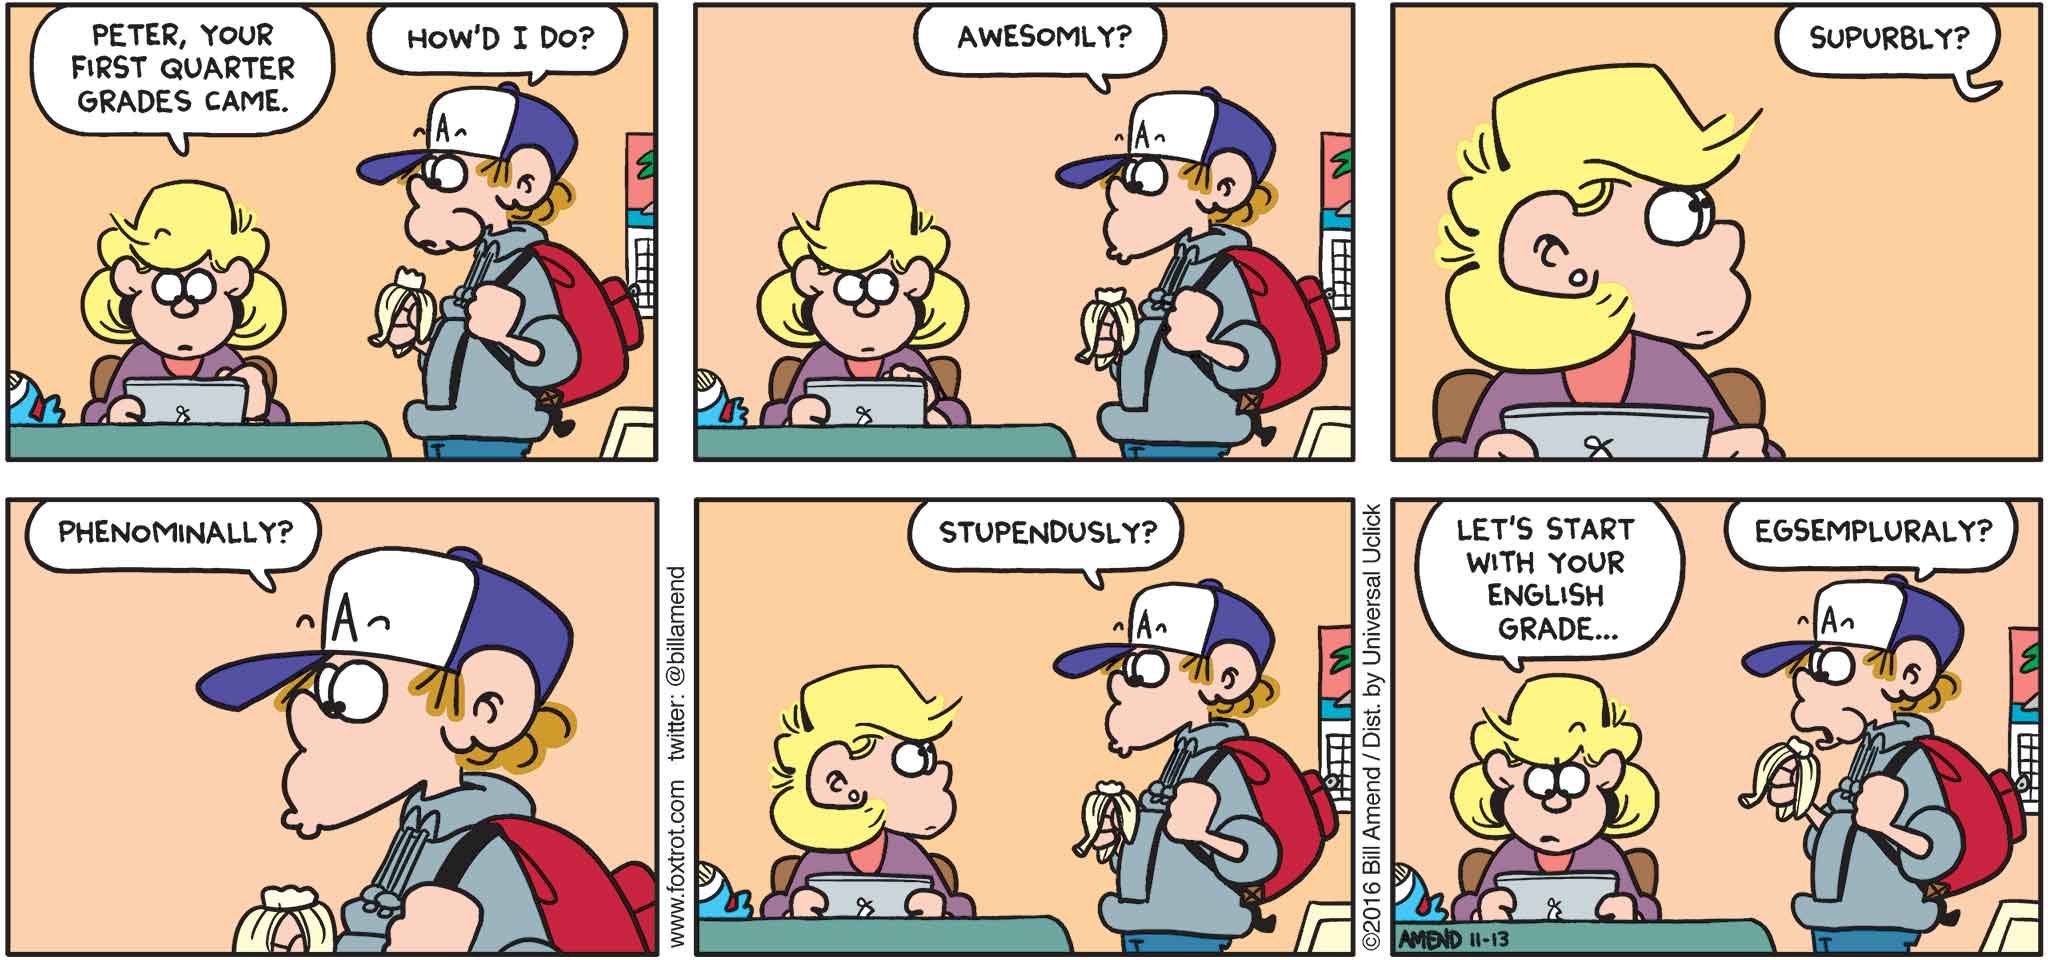 FoxTrot by Bill Amend - "Awesom Grades" published November 13, 2016 - Andy: Peter, your first quarter grades came. Peter: How'd I do? Awesomly? Supurbly? Phenominally? Stupendusly? Andy: Let's start with your English grade... Peter: Egsempluraly?